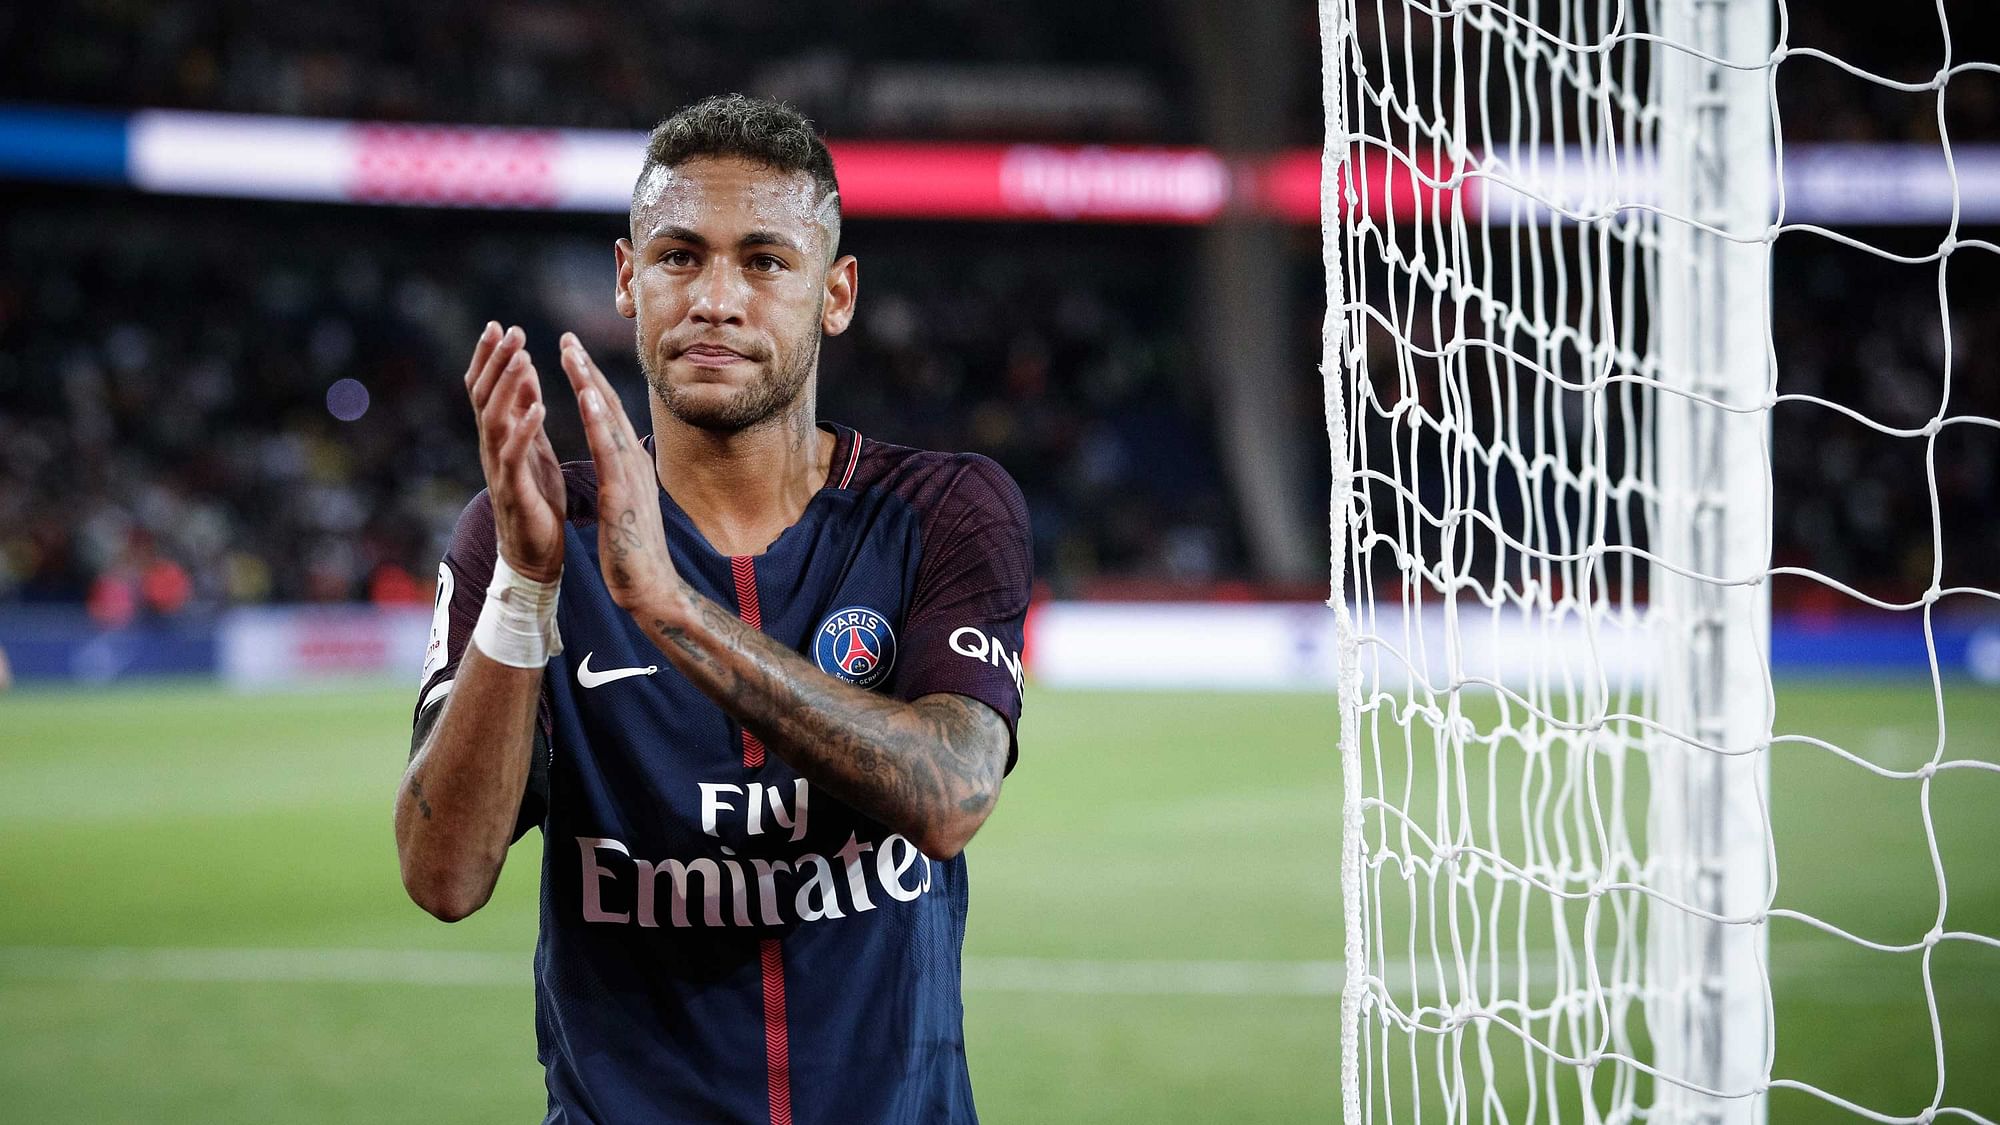 A Barcelona official involved in the negotiations with Paris Saint-Germain for Neymar says the Catalan club is “closer” to reaching a deal.